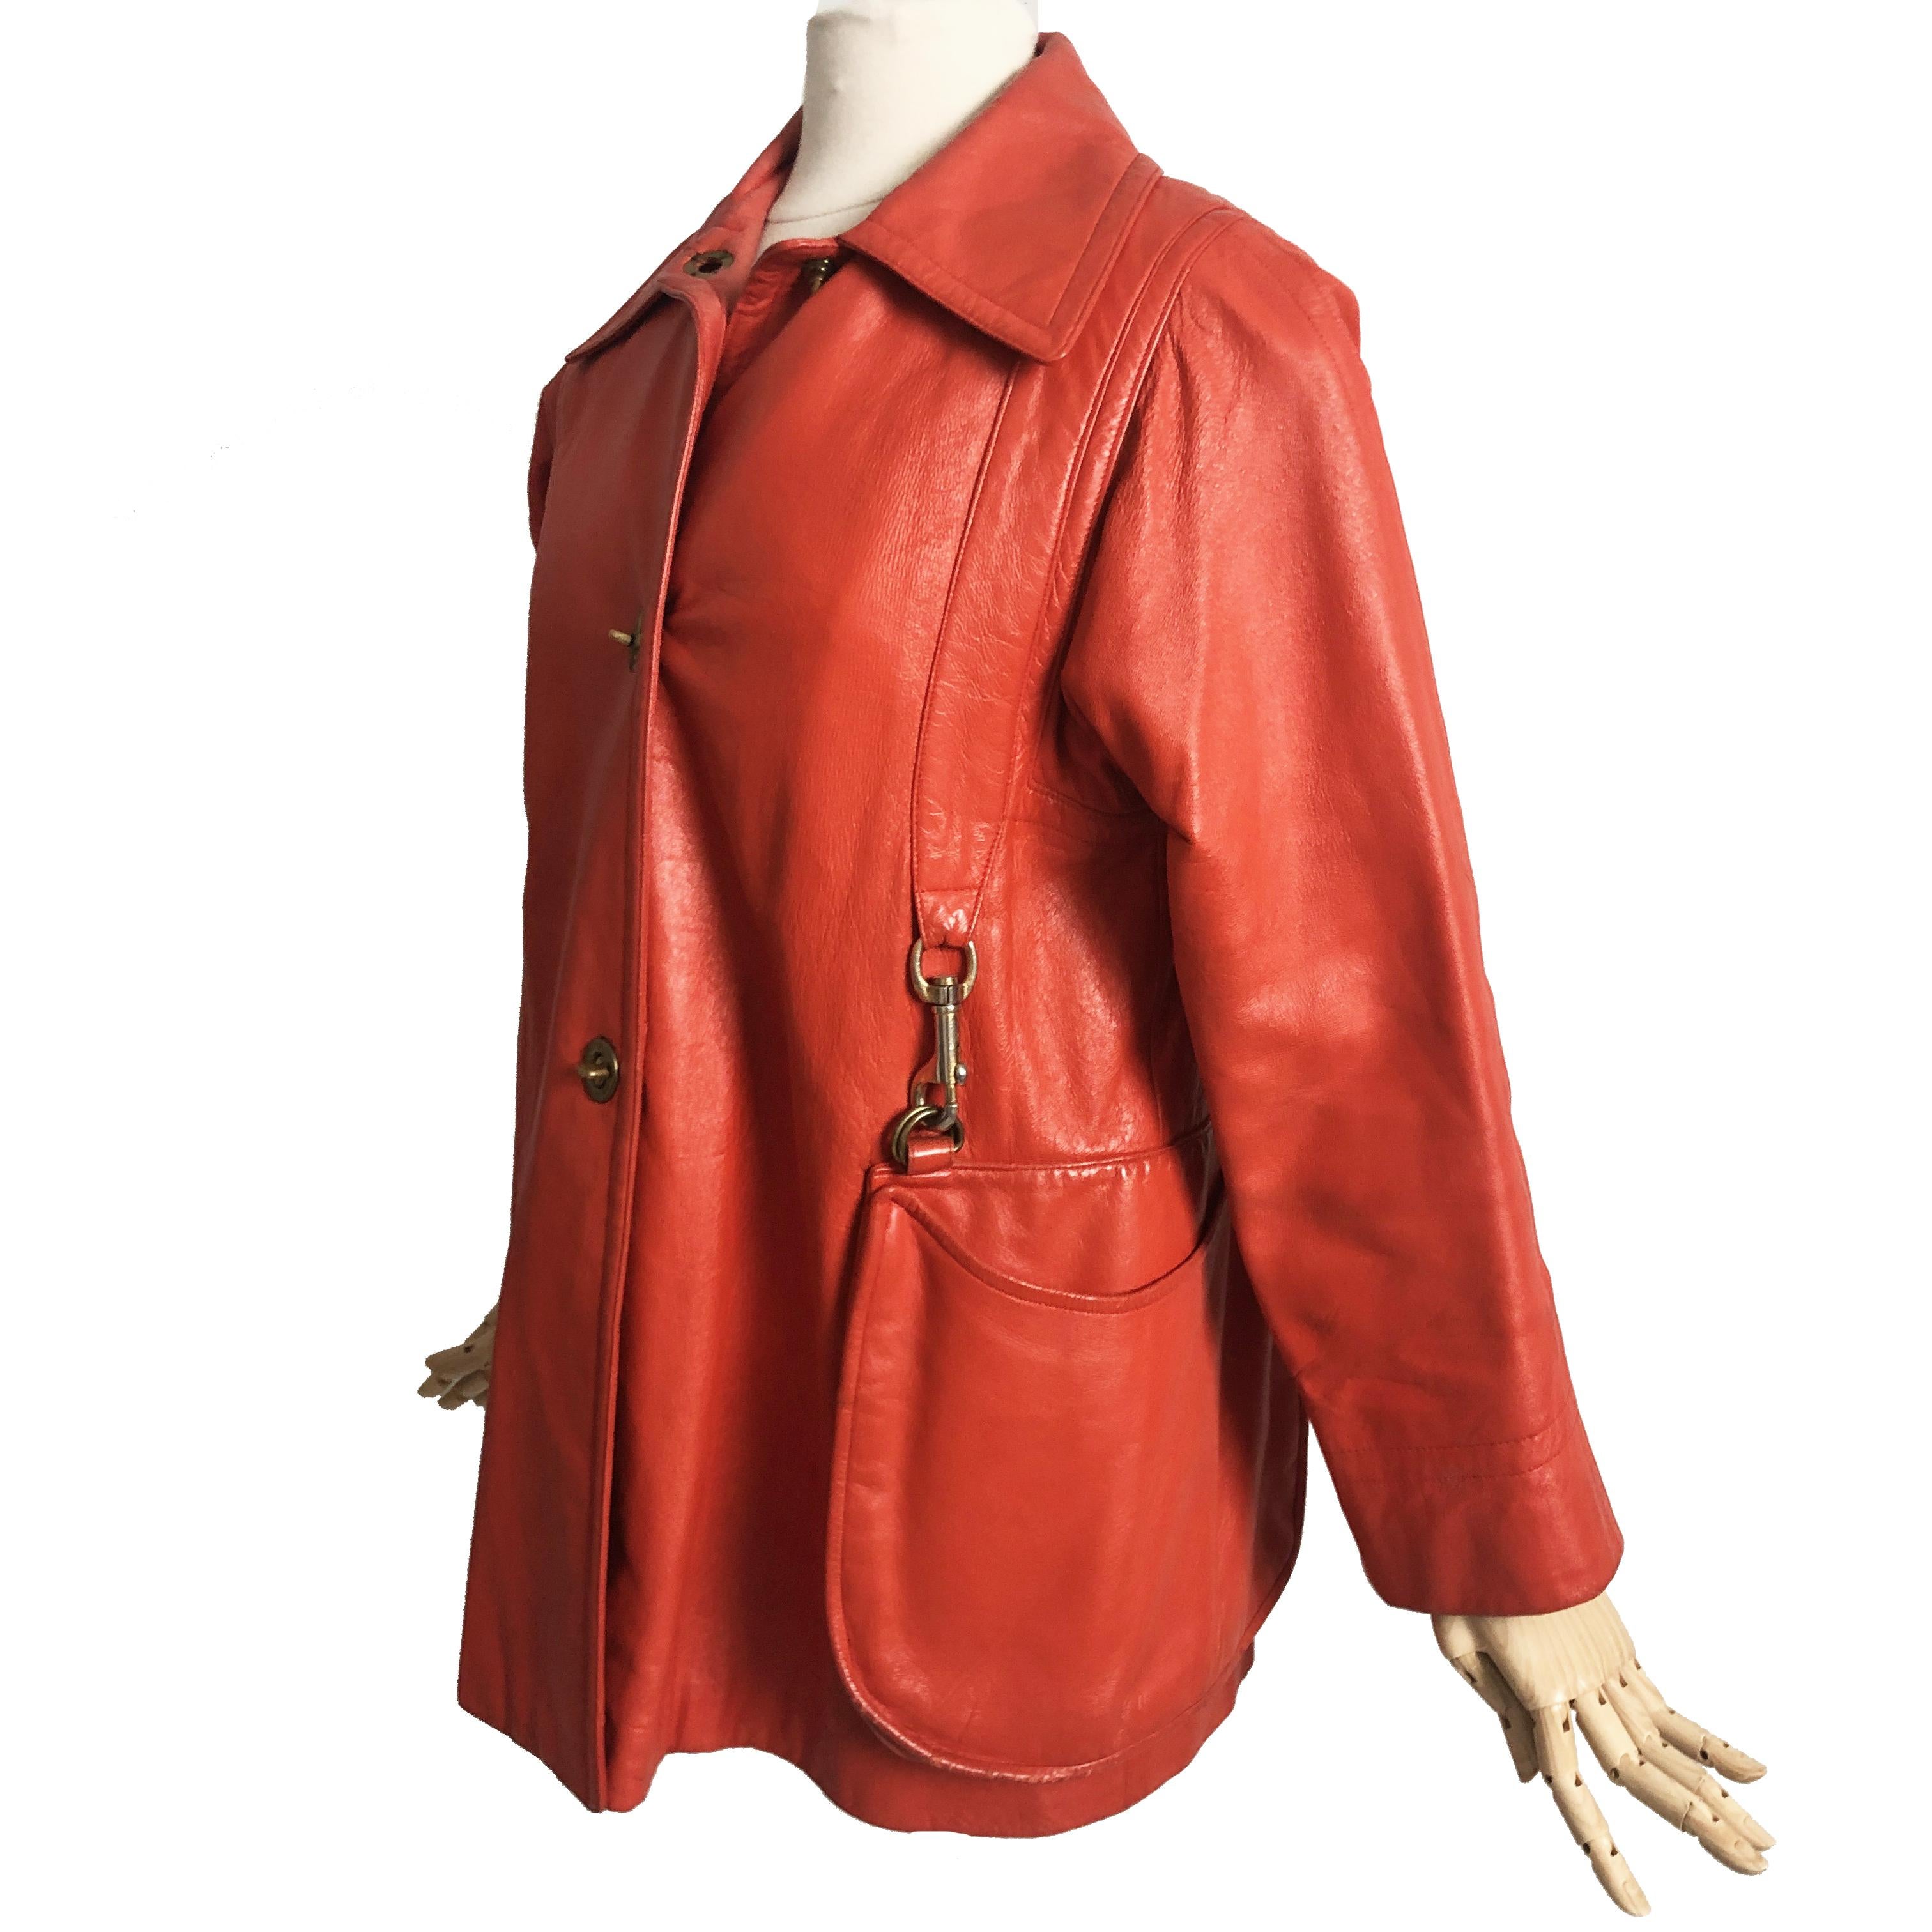 Bonnie Cashin Leather Jacket with Attached Hobo Bag Size S Mod Vintage 60s Rare  For Sale 2